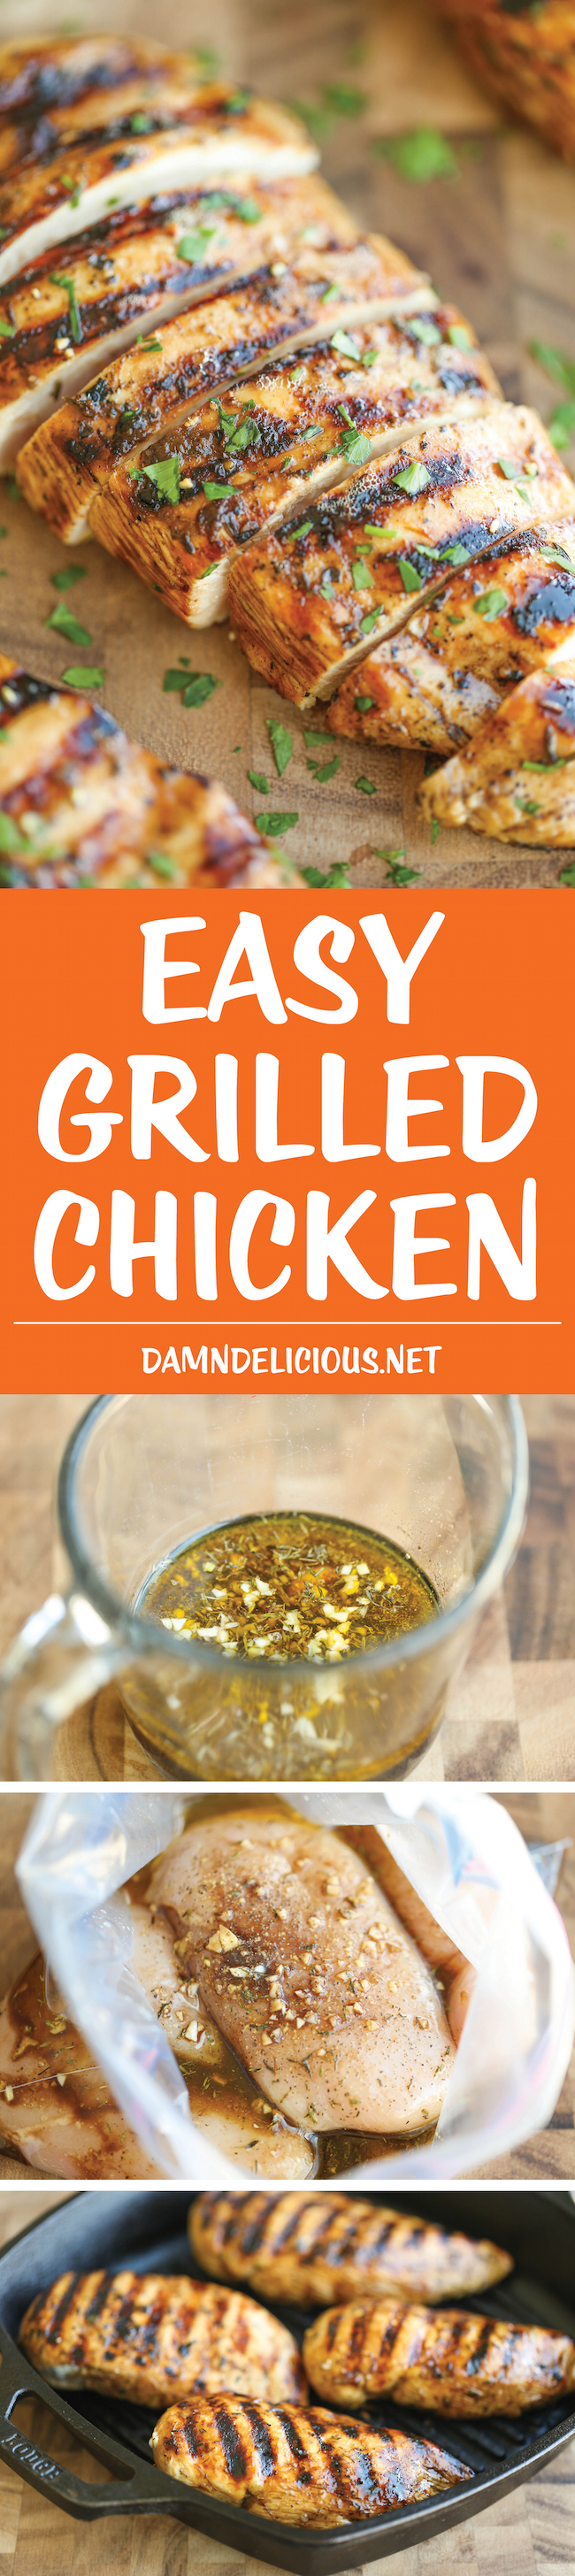 Easy Grilled Chicken - The best and easiest marinade ever - no-fuss and packed with so much flavor! You'll never need another grilled chicken recipe again!